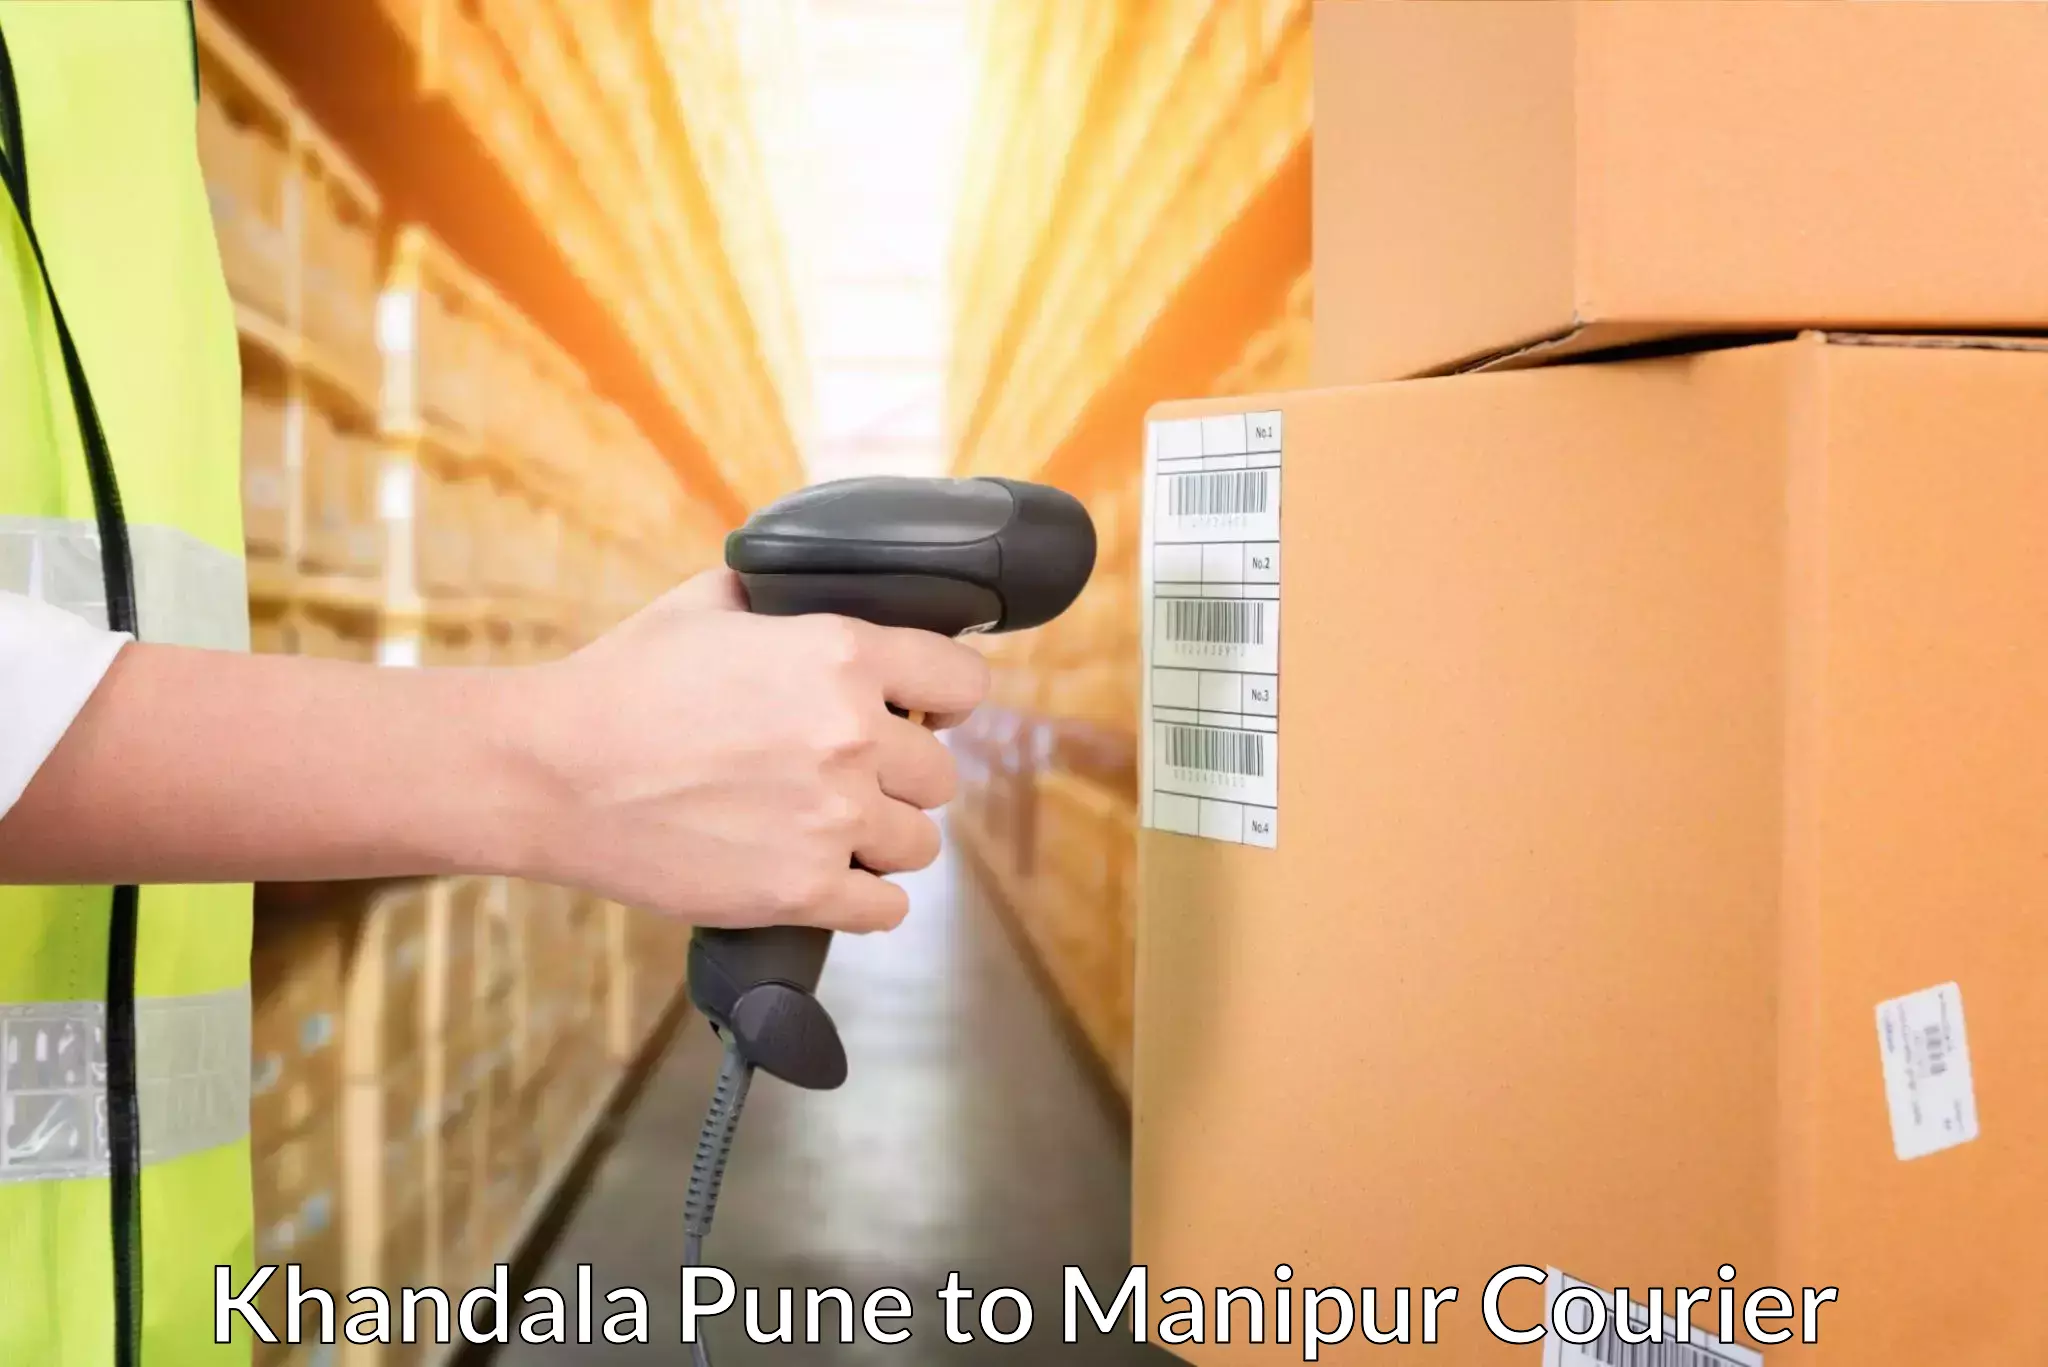 End-to-end delivery Khandala Pune to Imphal